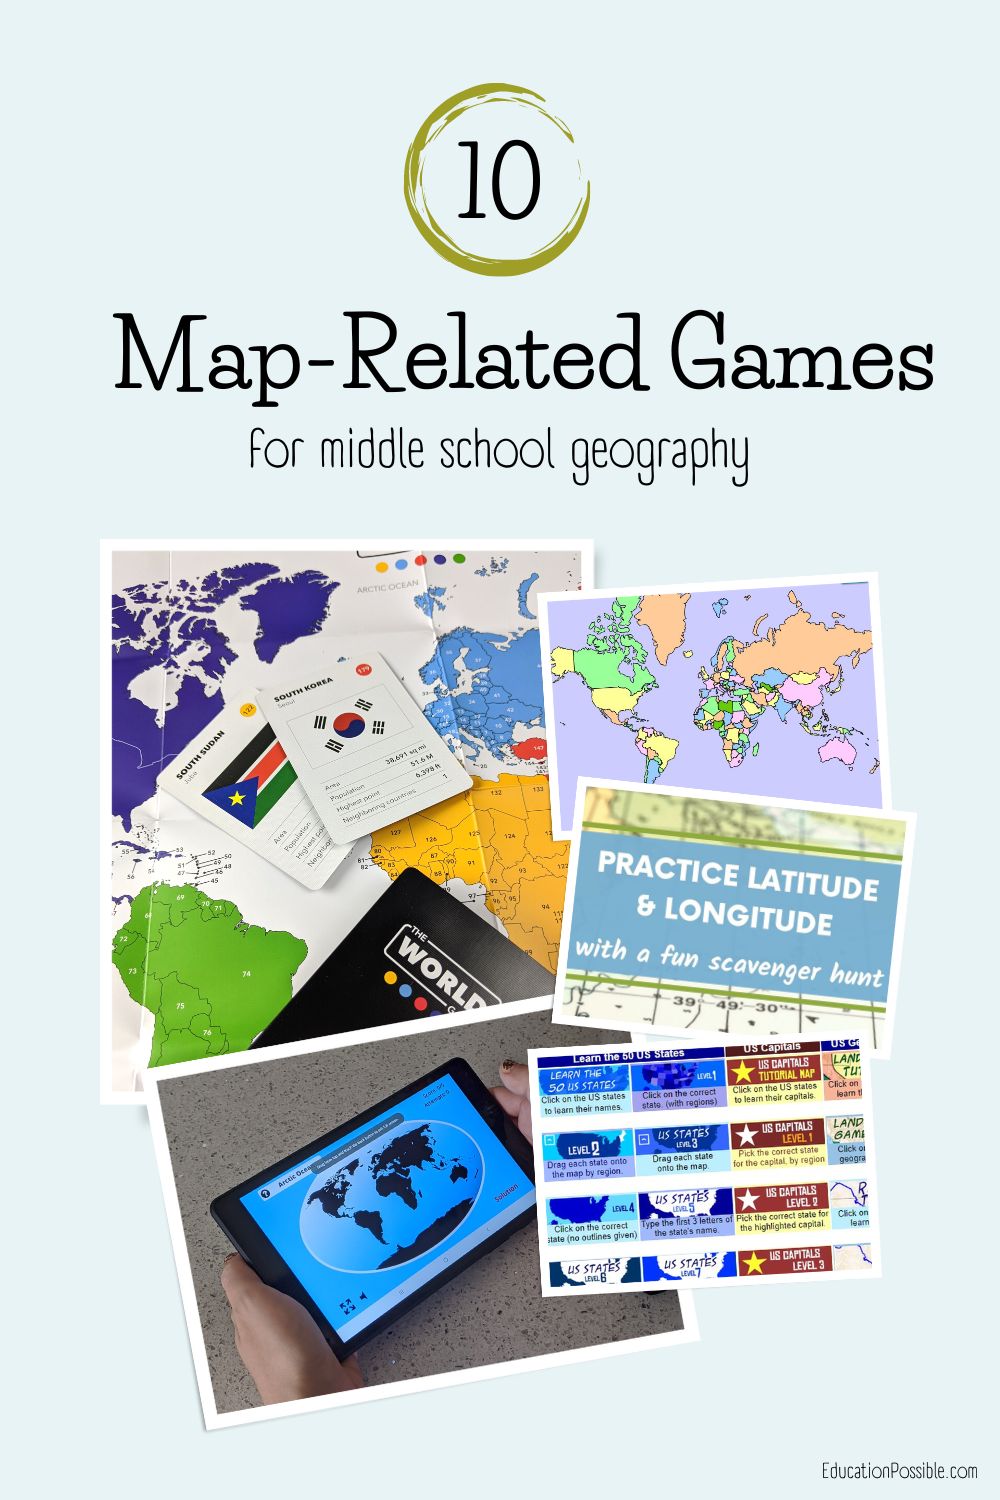 5 images of map-related games for teaching geography. Board game, online games, and a scavenger hunt.